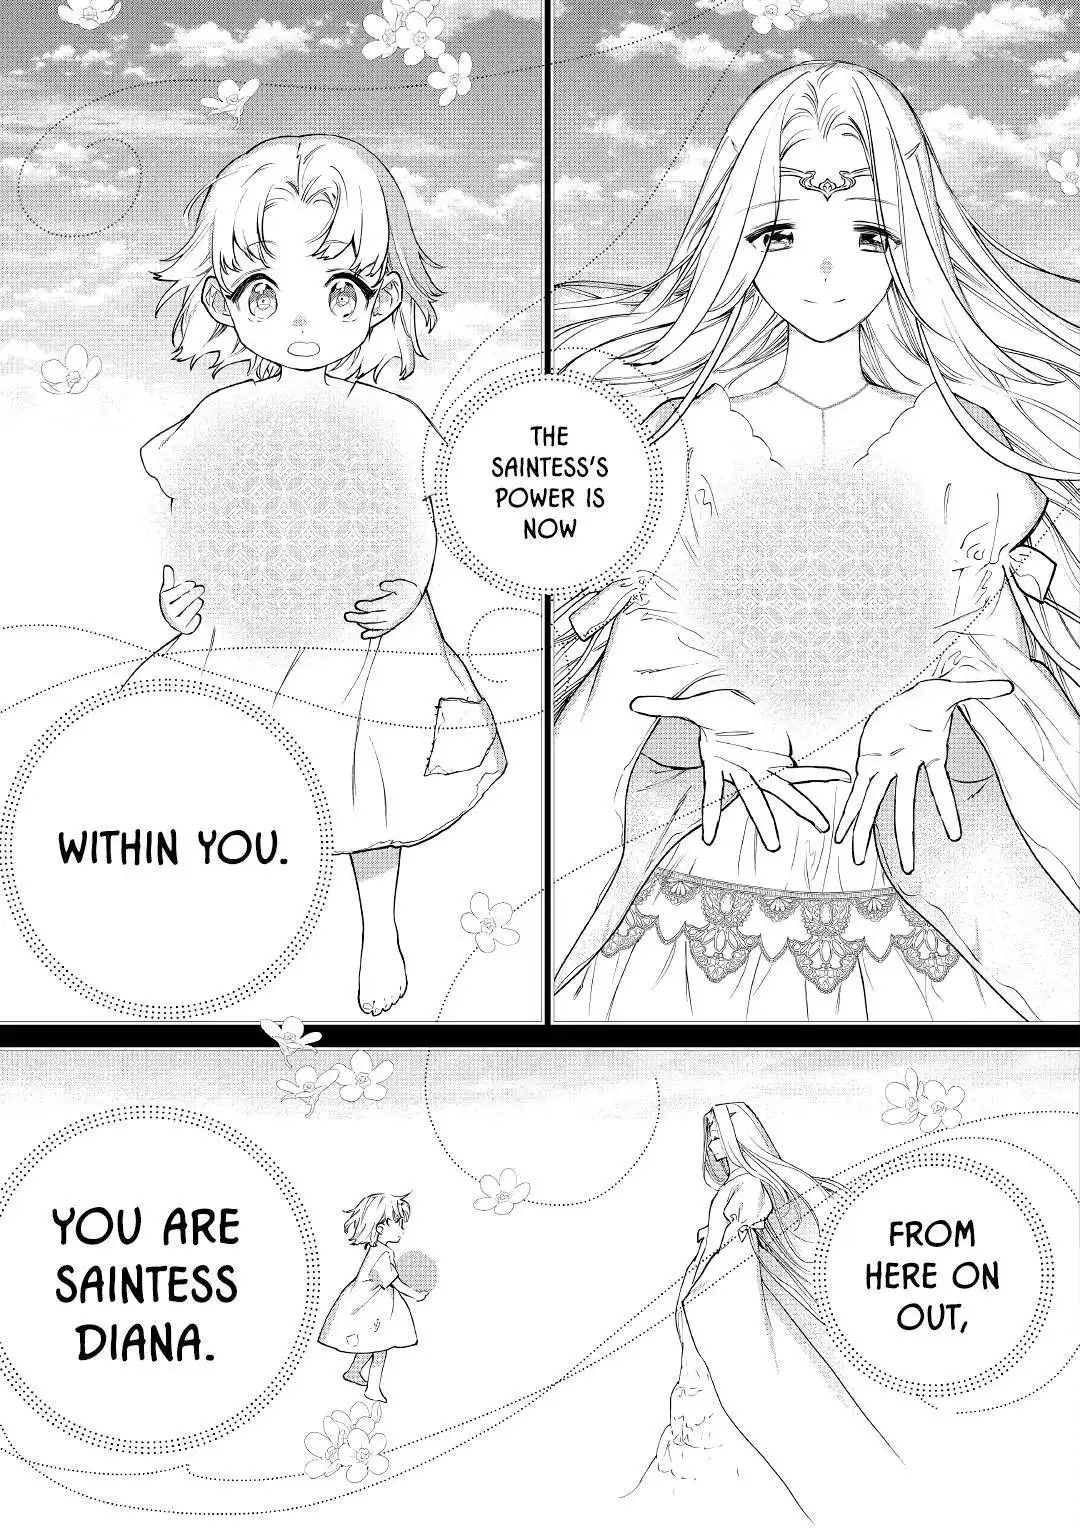 May I Please Ask You Just One Last Thing? Chapter 25